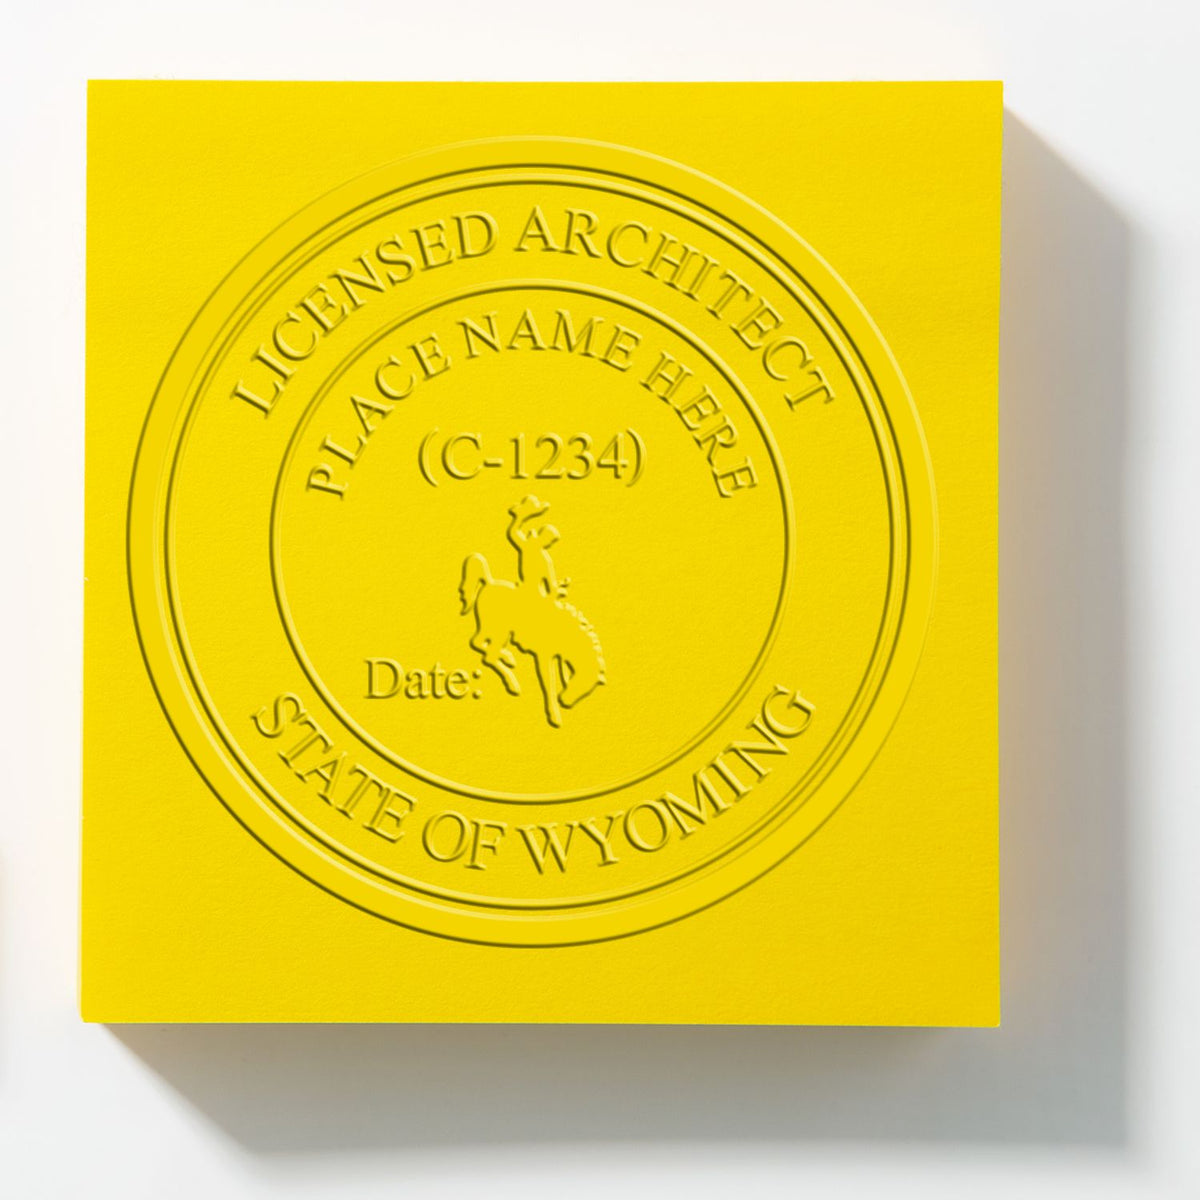 An alternative view of the Hybrid Wyoming Architect Seal stamped on a sheet of paper showing the image in use